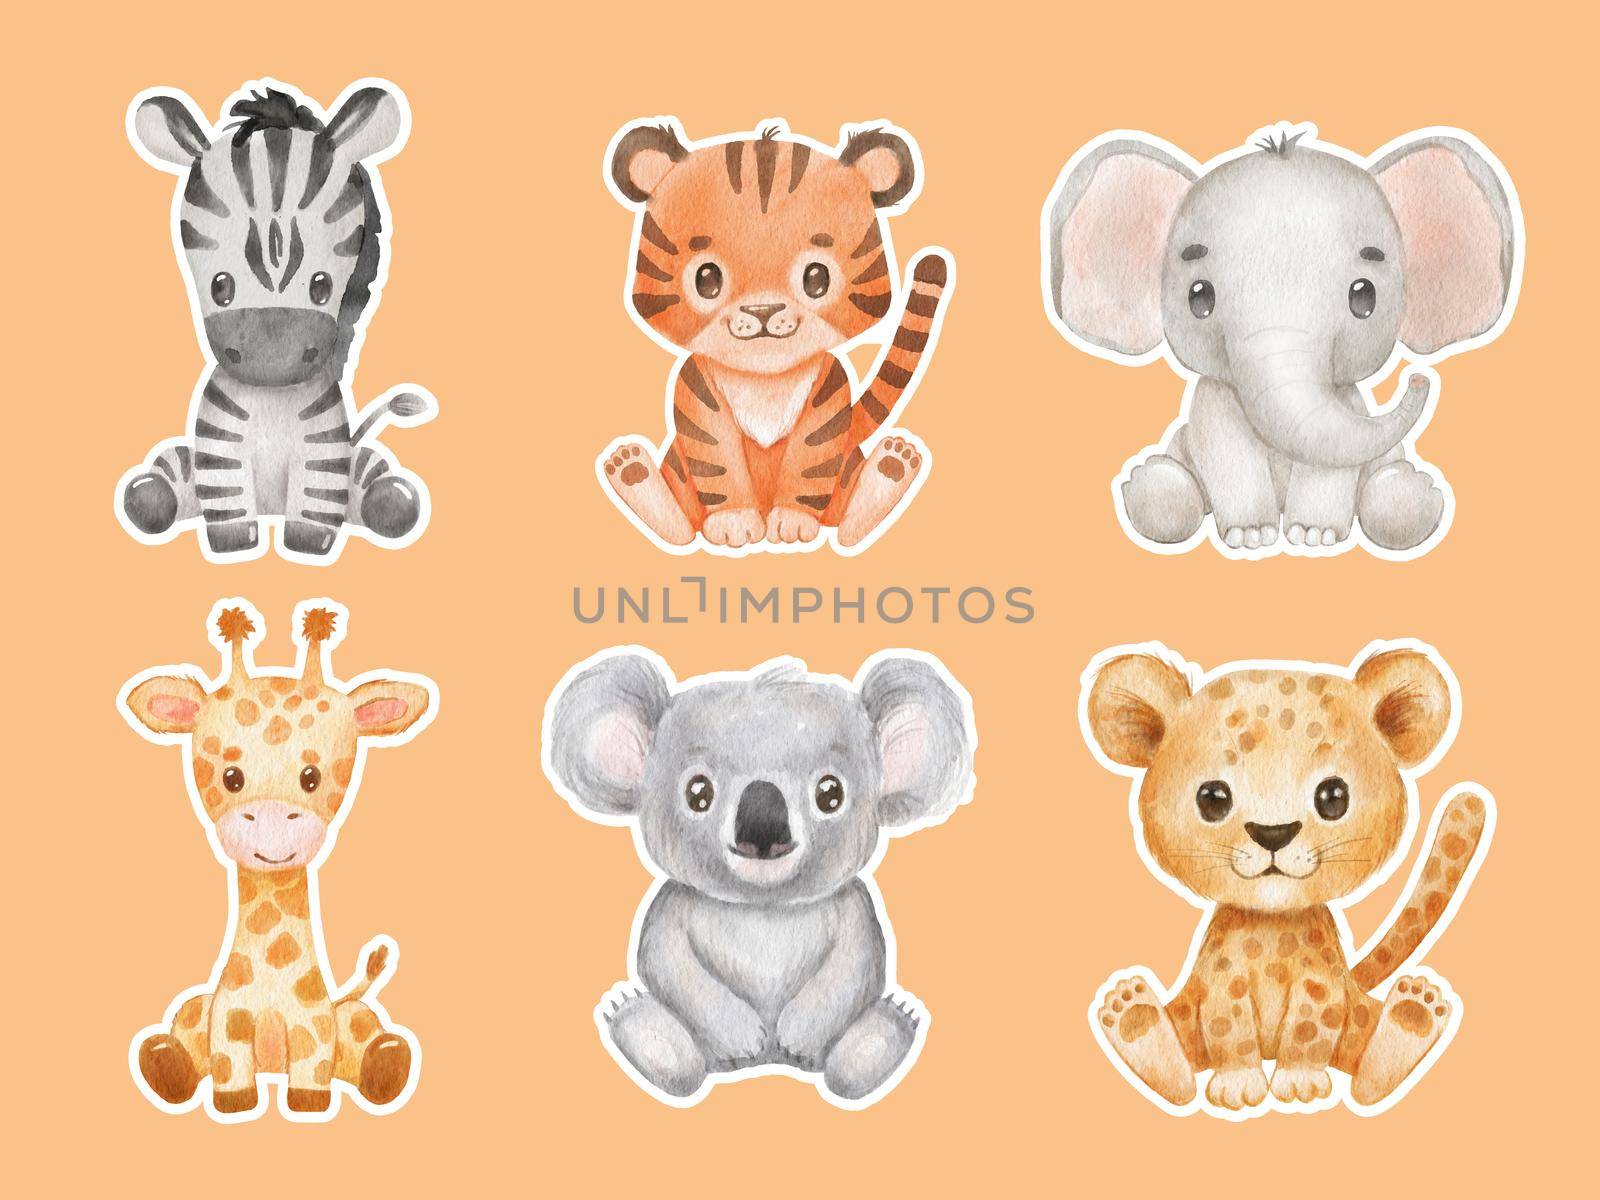 Hand drawn stickers. Cute portraits tiger, koala, elephant in cartoon style. Drawing african baby zebra and giraffe isolated on white background. Set of sitting Jungle animals by ElenaPlatova